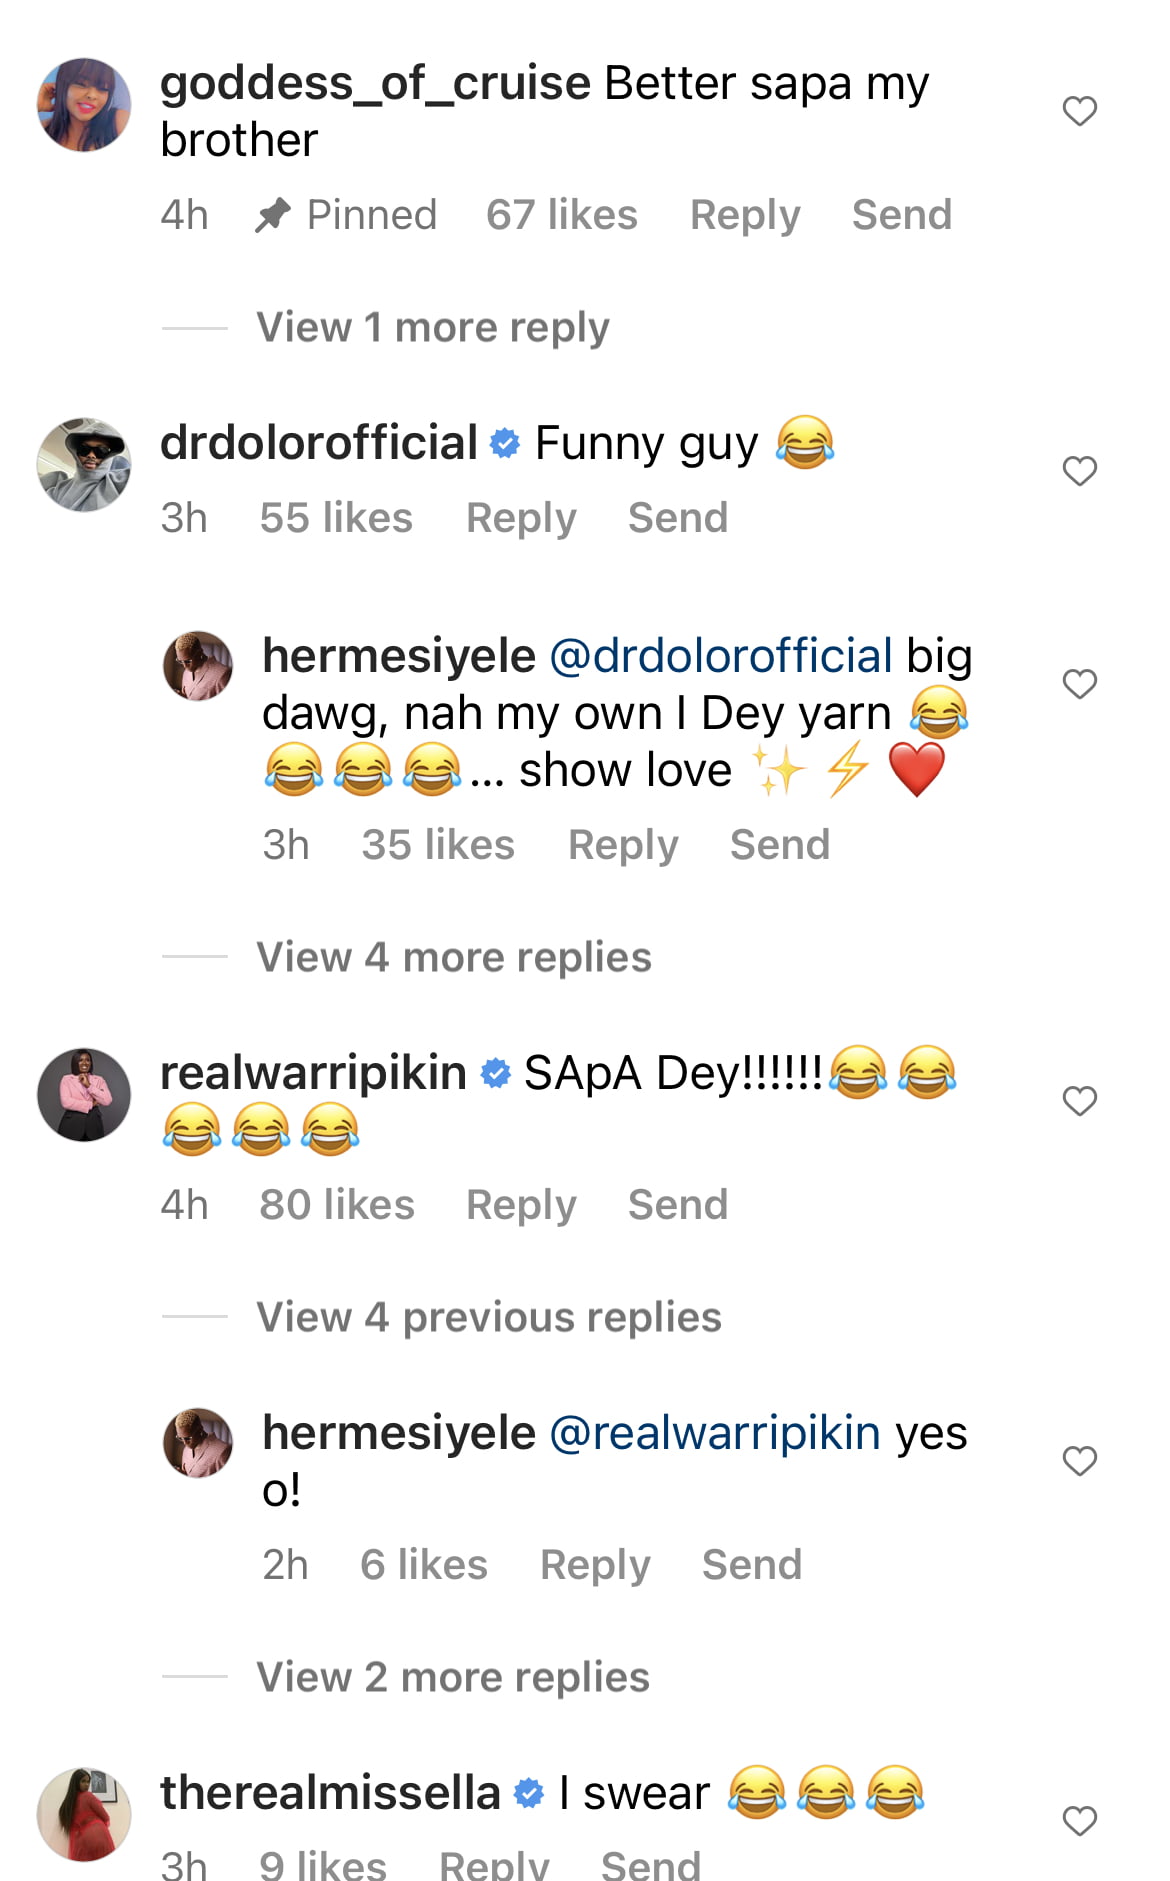 Things are hard, can’t buy cheap stuff from yaba again due to fame - BBNaija Hermes laments, beg fans for help [video]